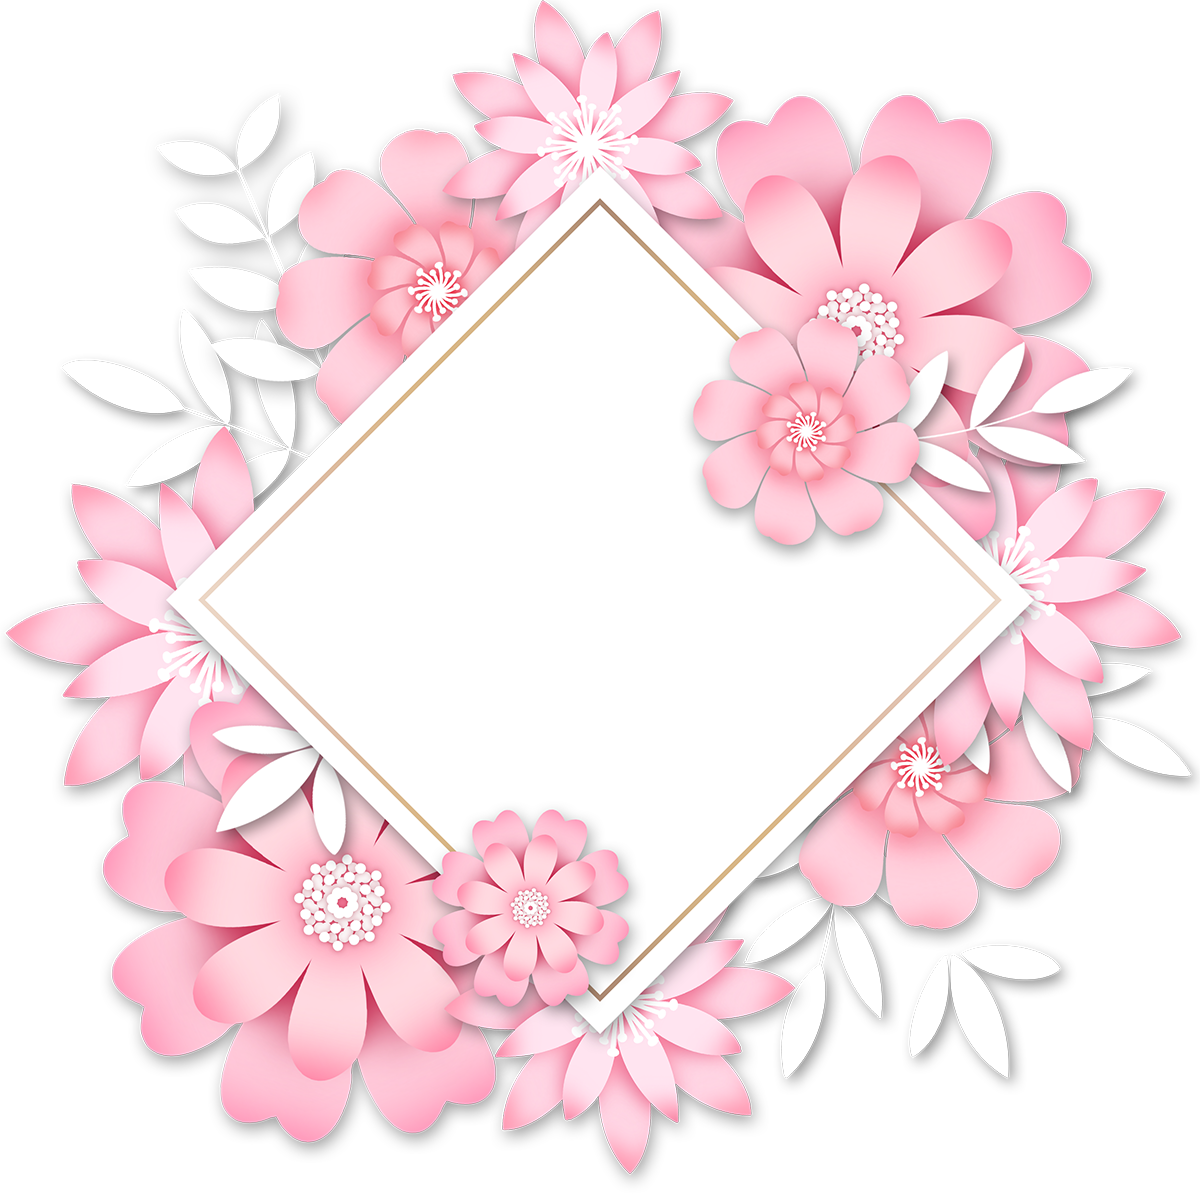 Girly Border PNG Images